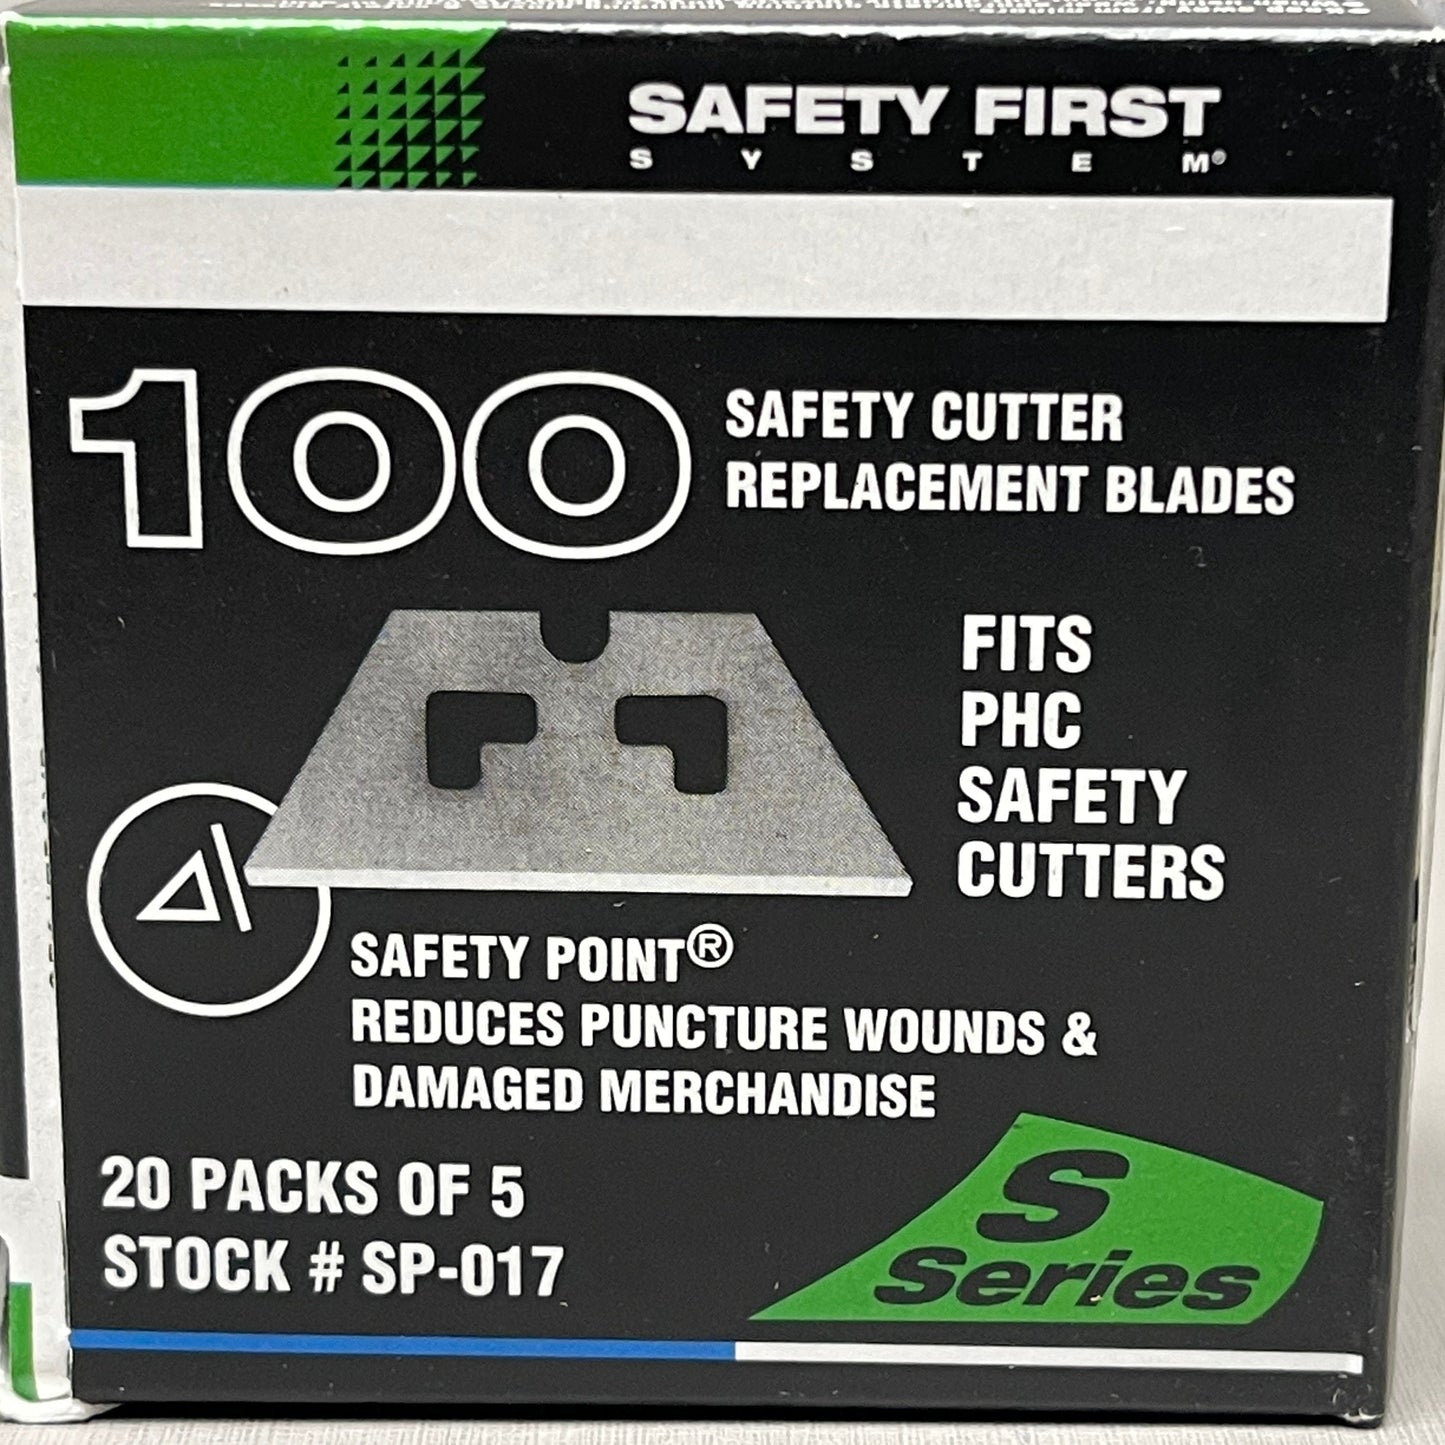 PACIFIC HANDY CUTTER 5-PACK! 100 Ct Safety Cutter Replacement Blades (New)